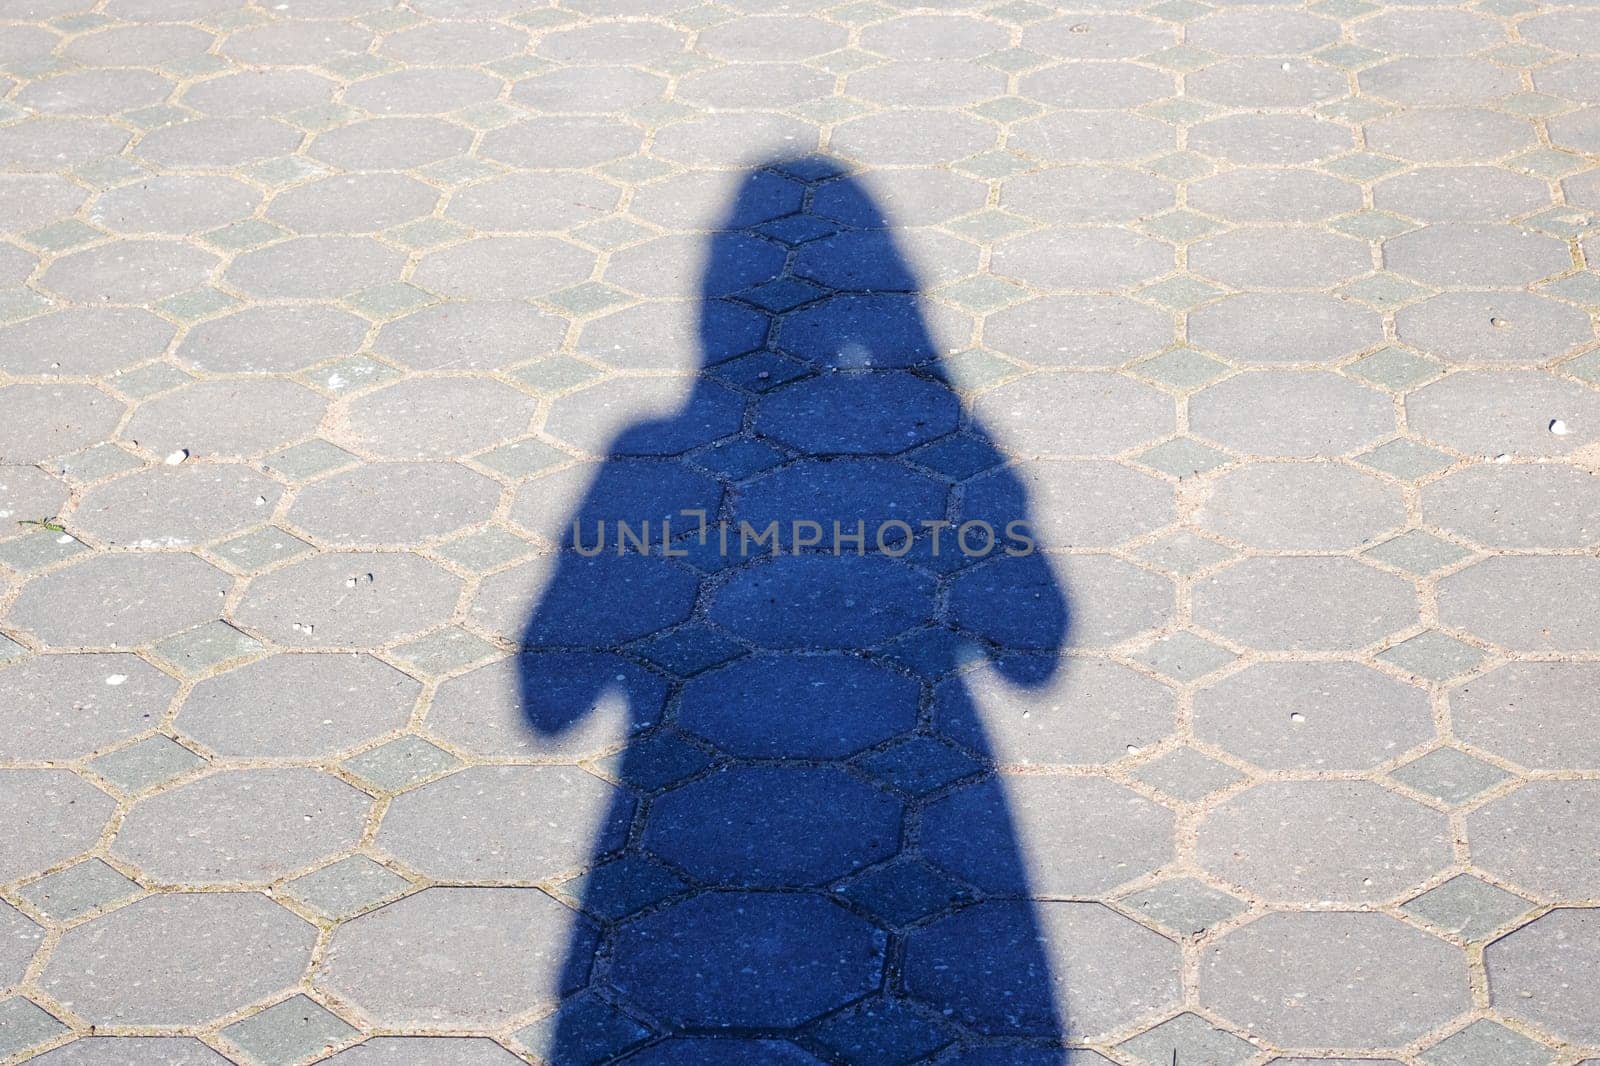 A womans shadow falls on the asphalt road, her outerwear a vibrant electric blue against the tar. People in nature, enjoying recreation under the tinted shades of the trees